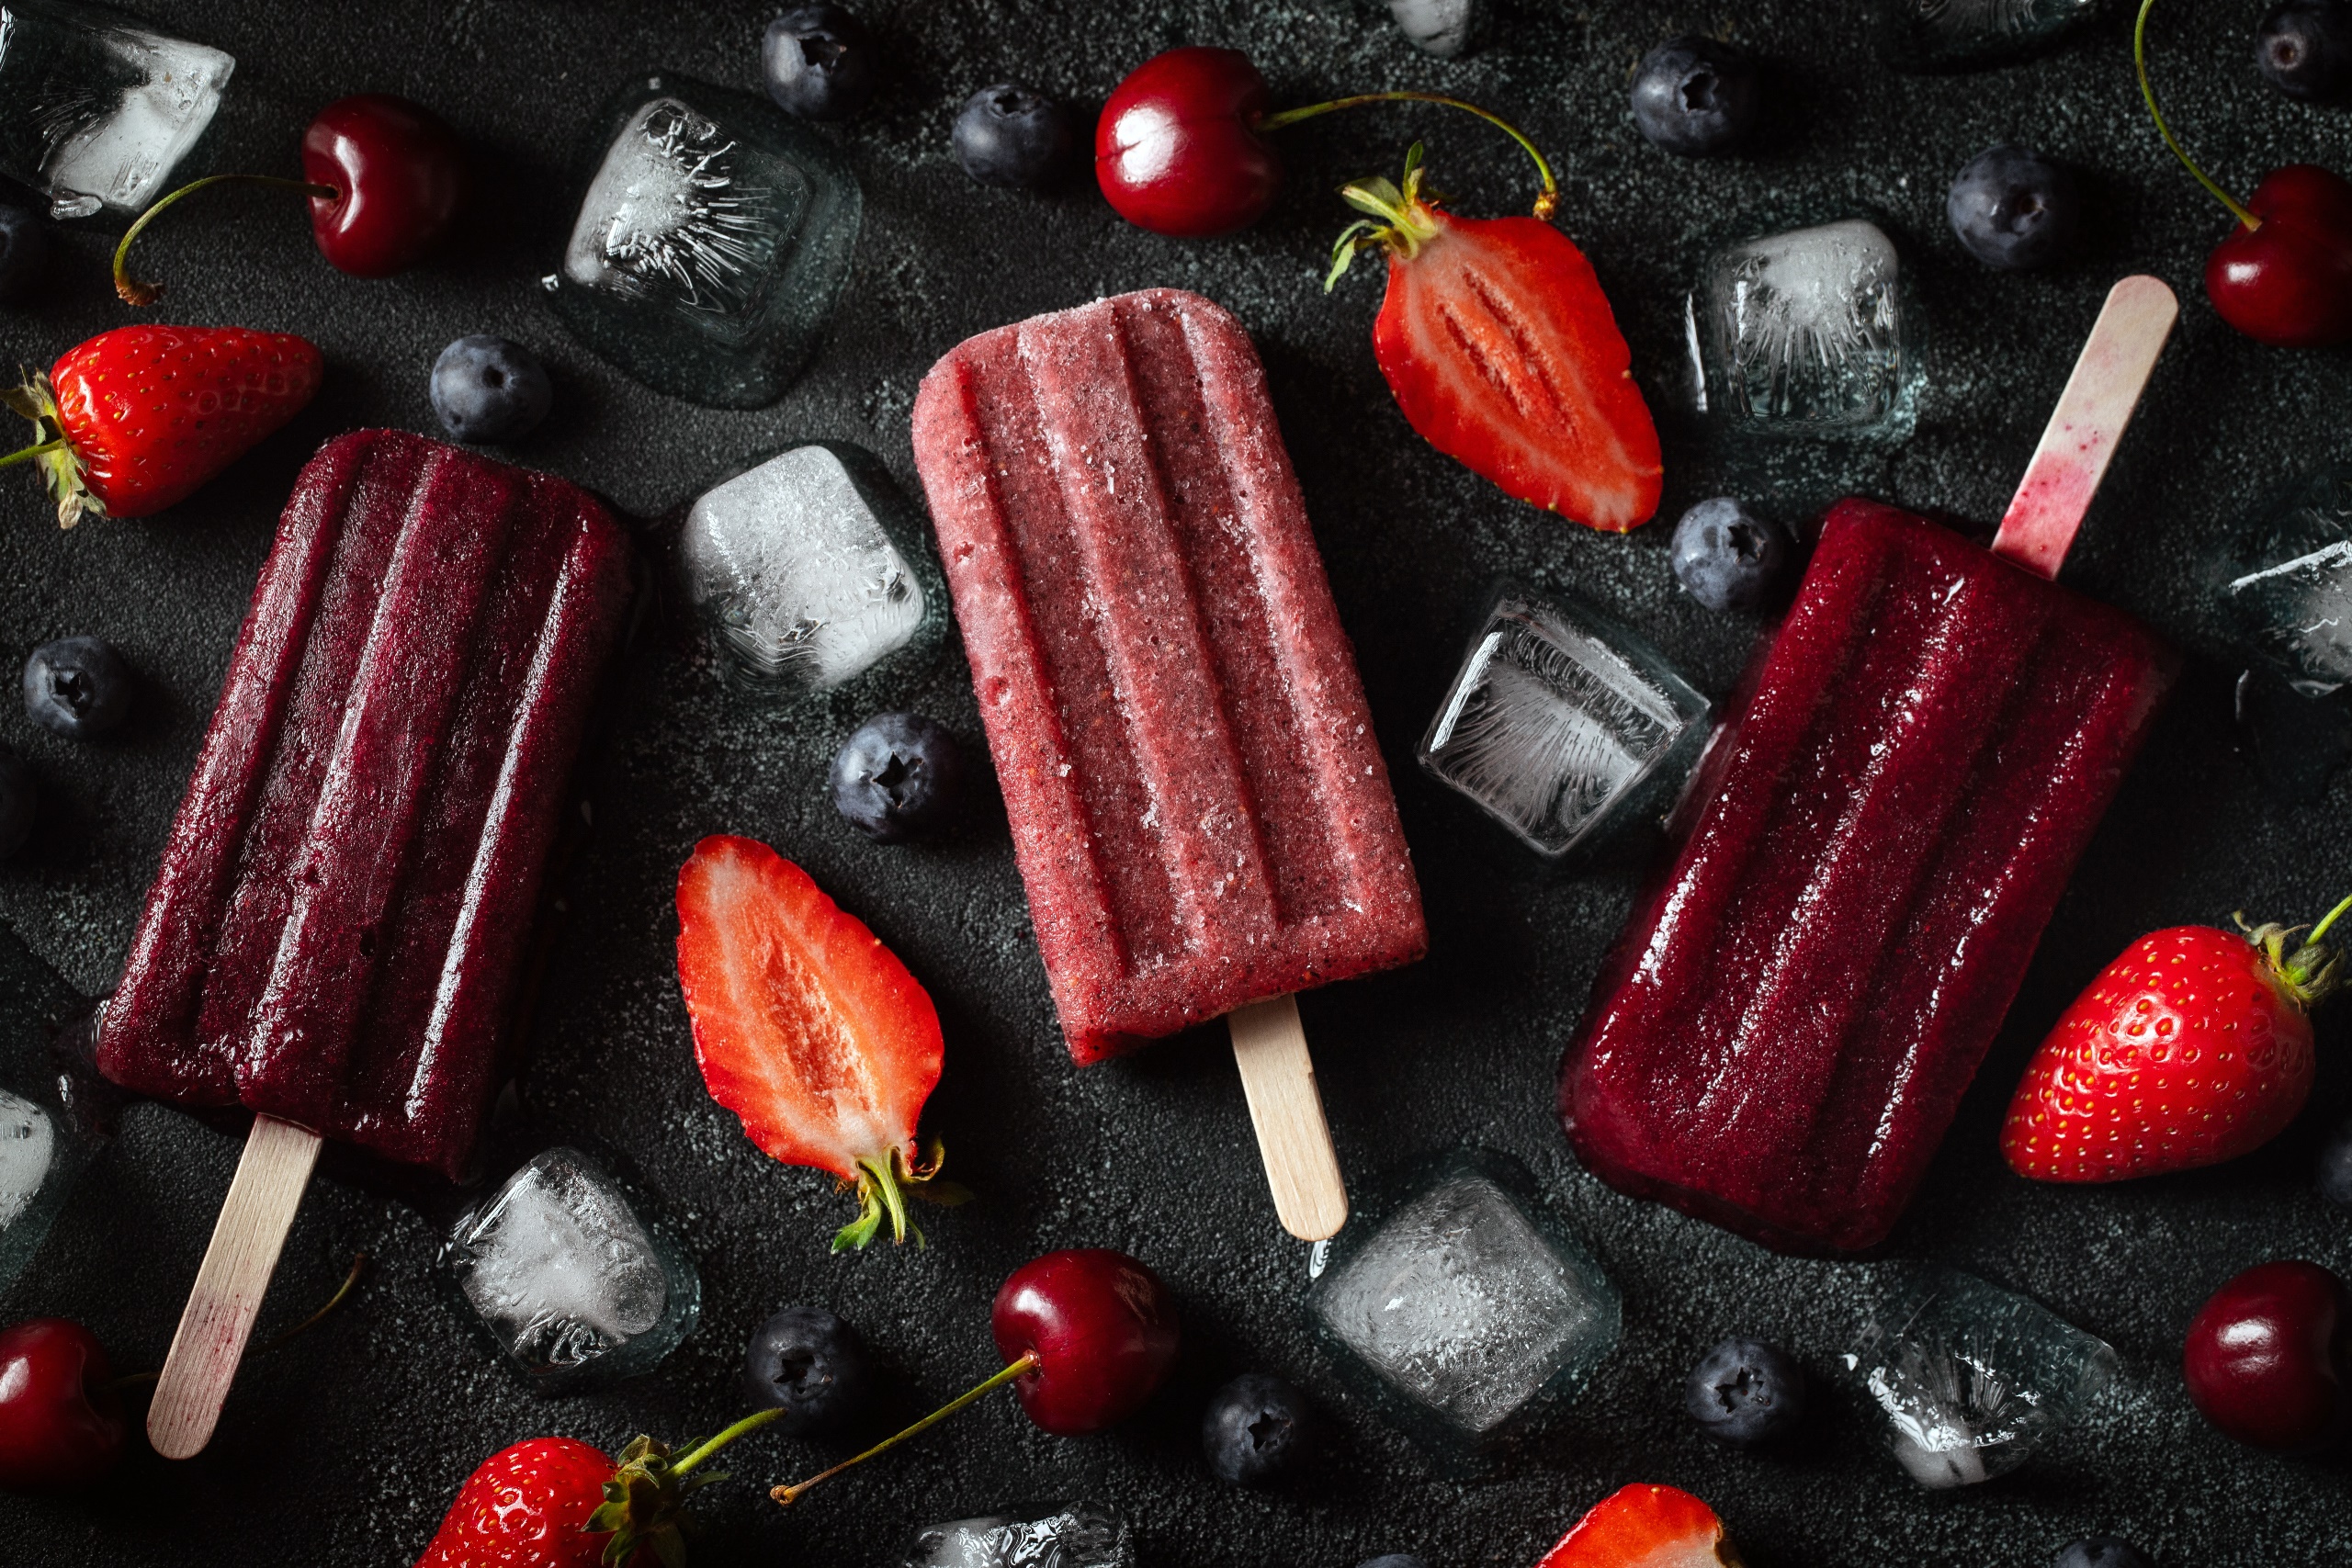 Strawberry and Cherry Popsicles